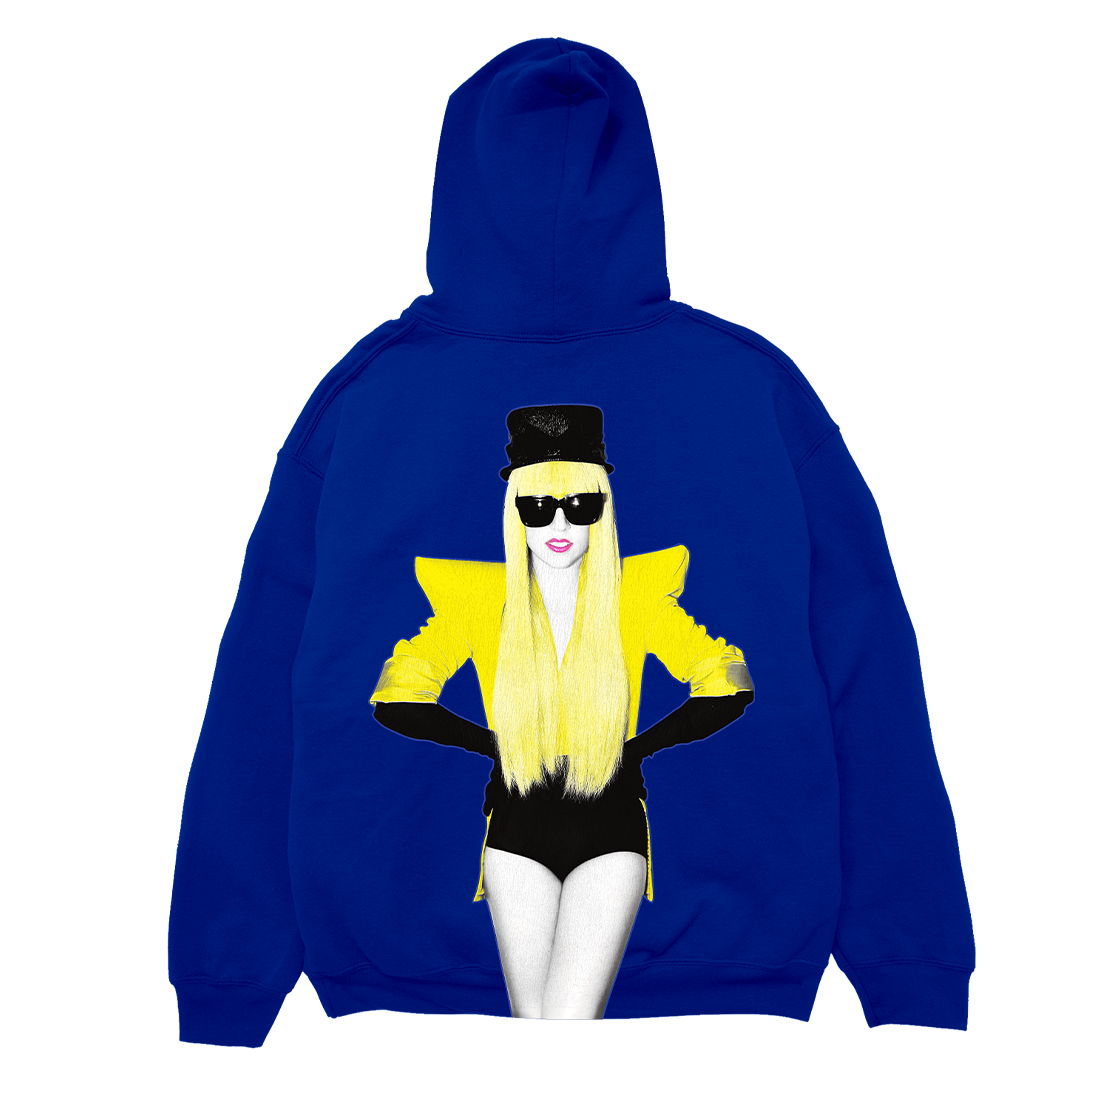 THE FAME BLUE HOODIE